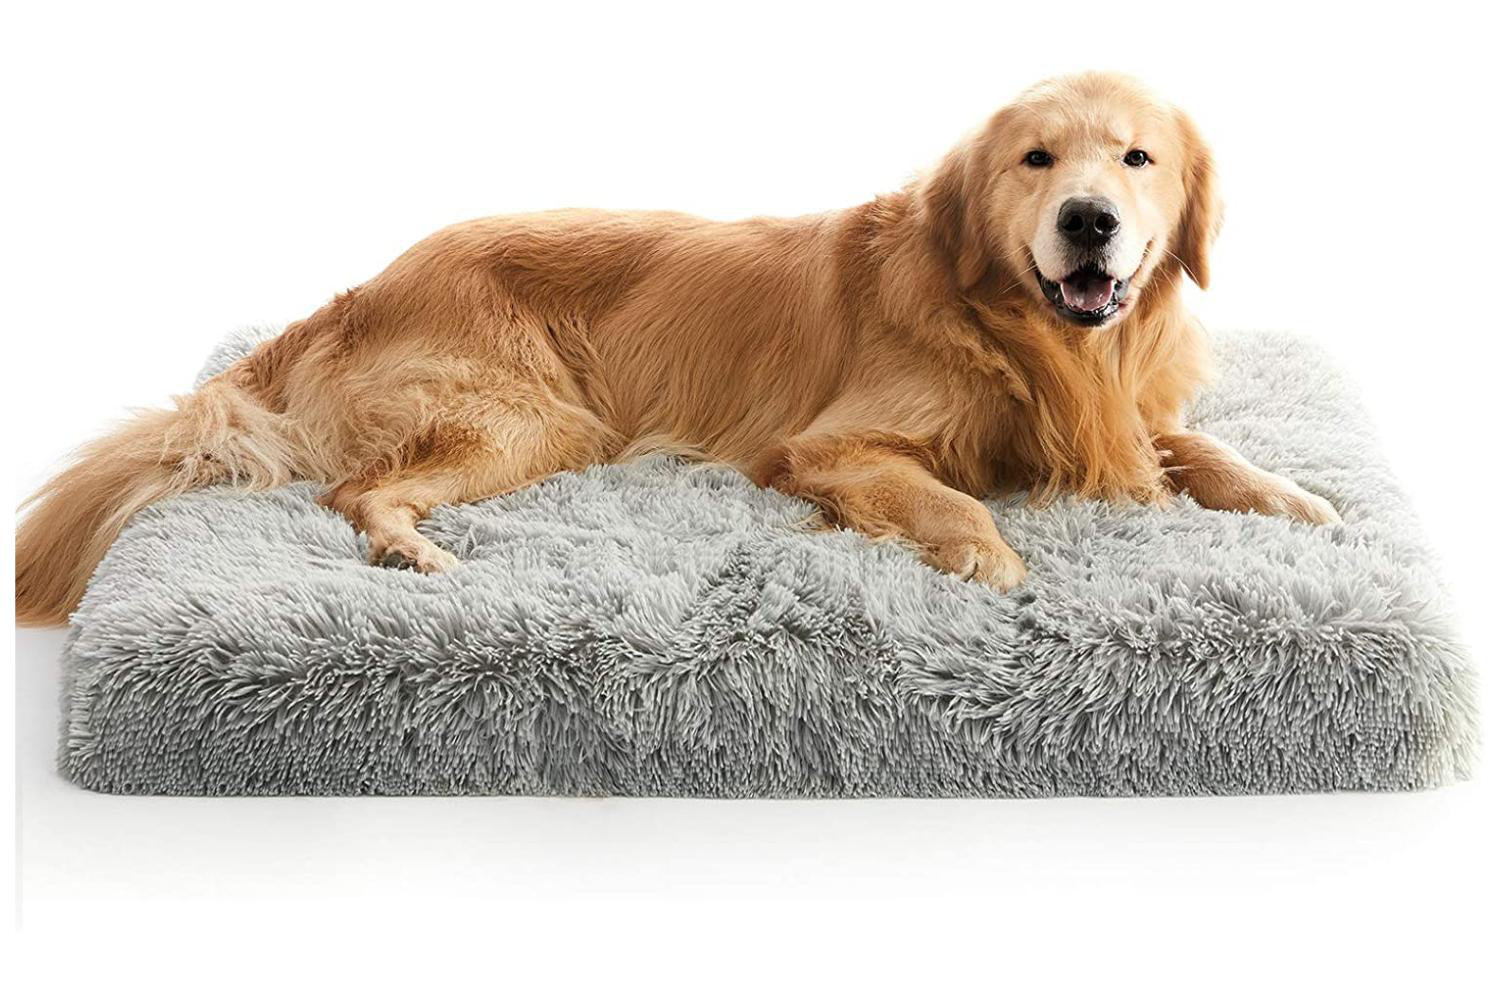 Tucker Murphy Pet™ Orthopedic Dog Bed For Large Dogs With Plush